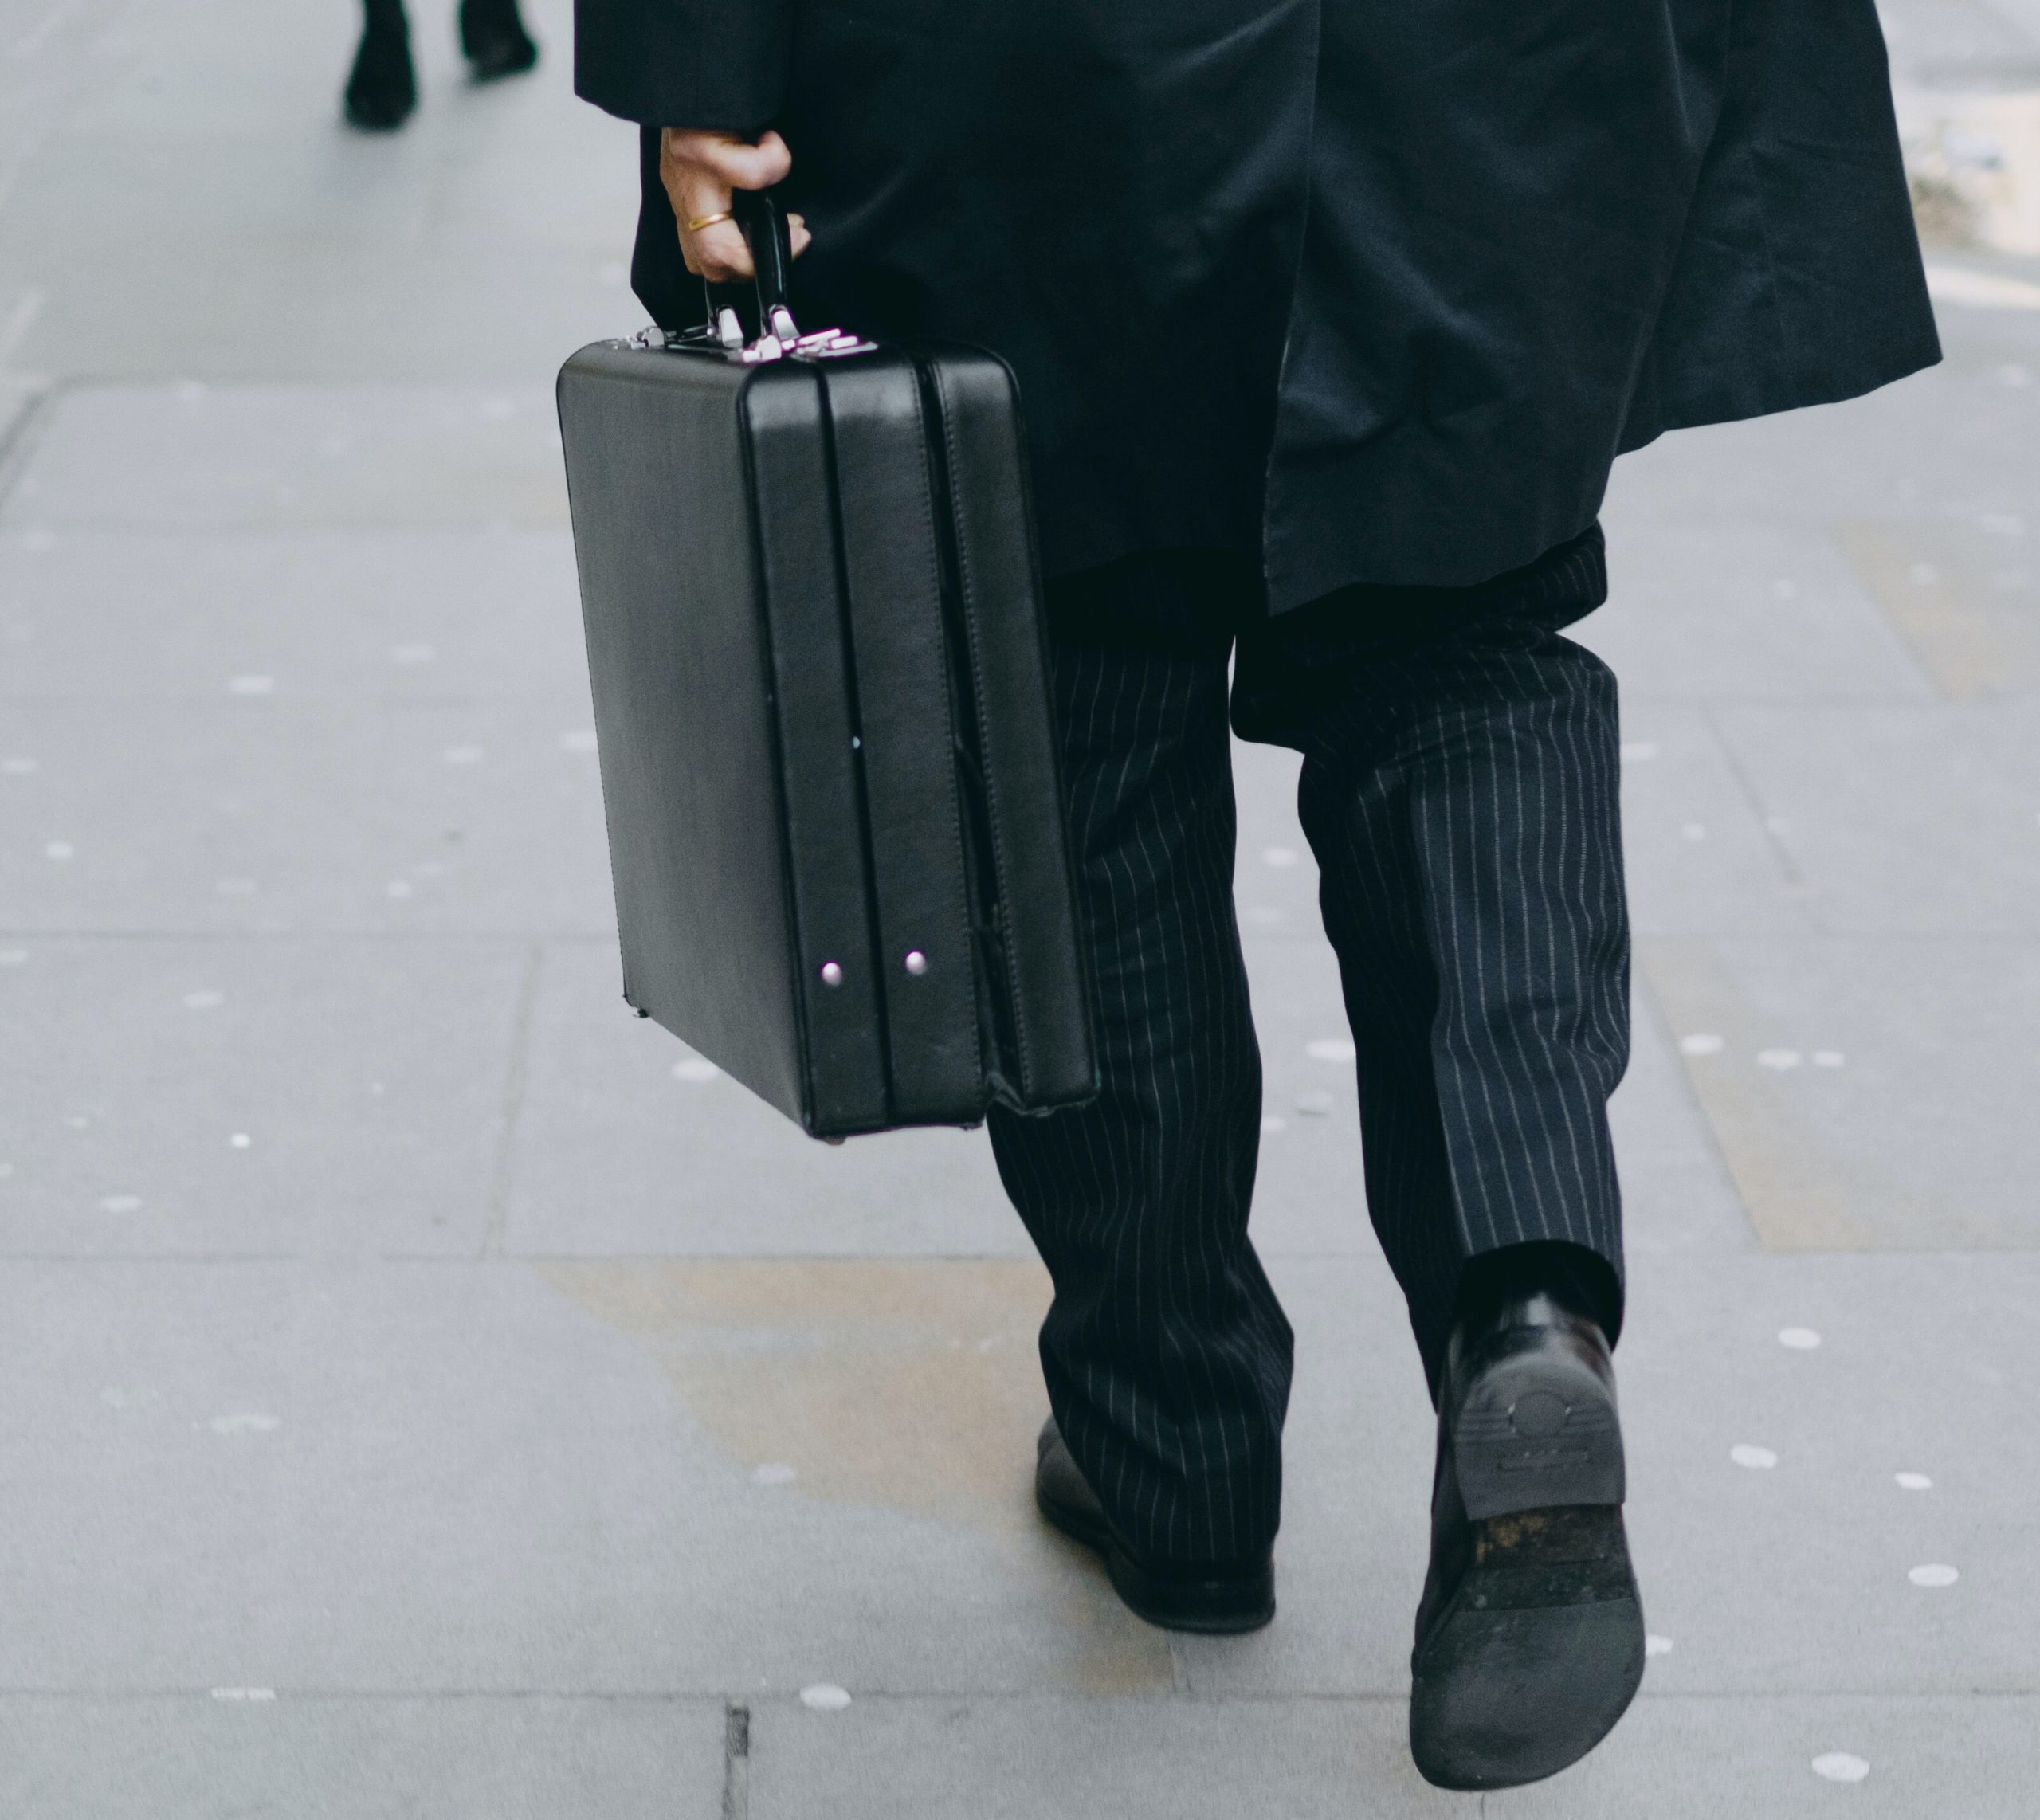 A man's bottom half walking in business clothes with a briefcase in hand. The photograph is from behind the subject.